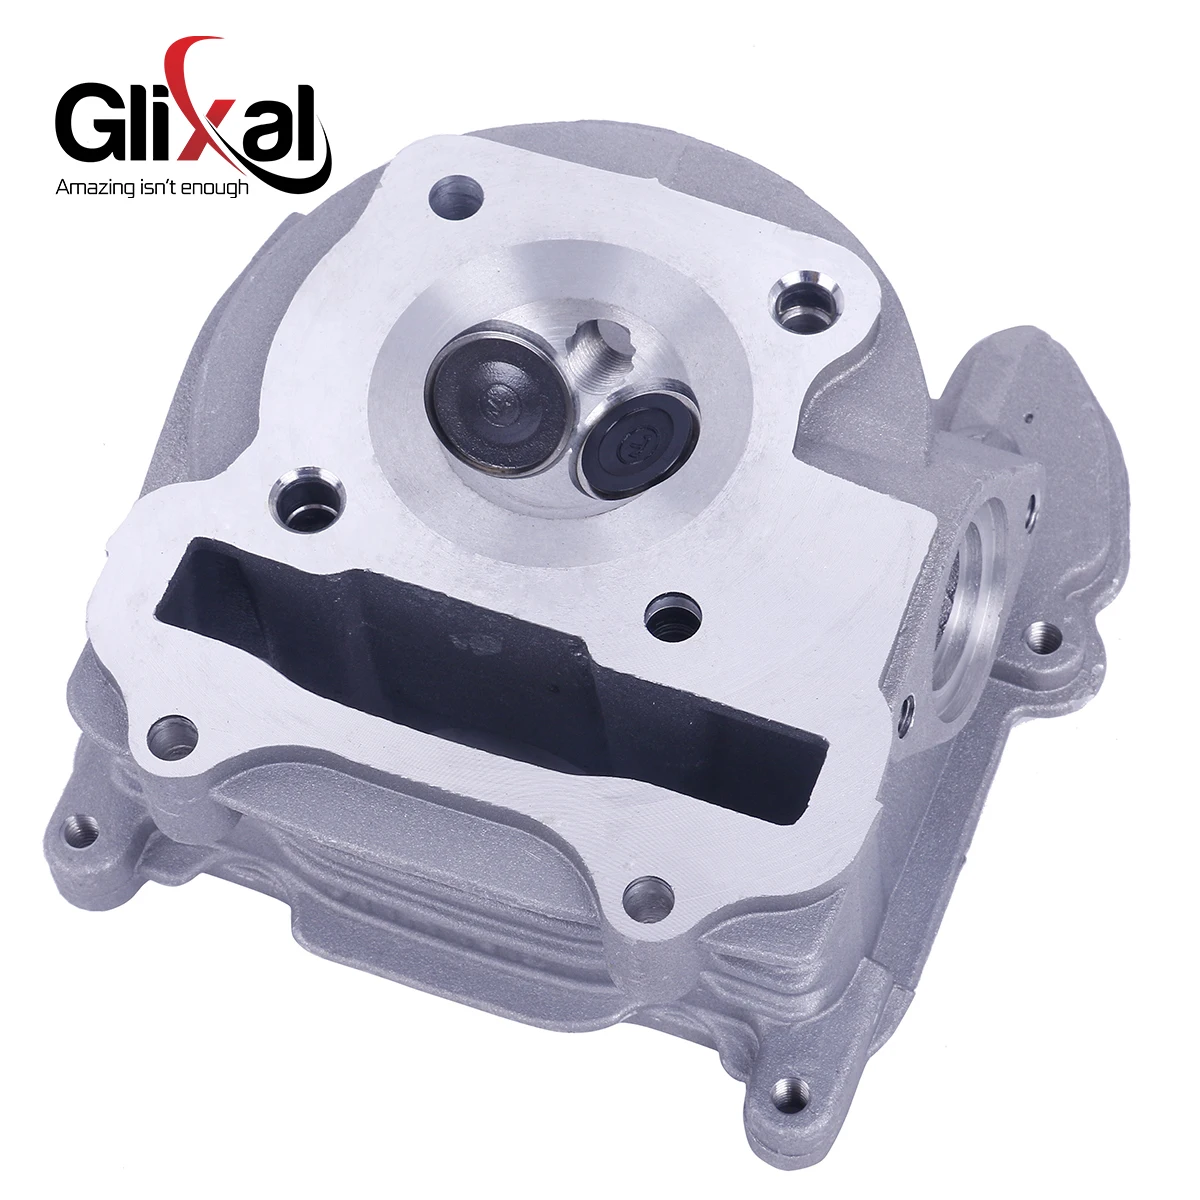 

Glixal GY6 100cc Chinese Scooter Engine 50mm Big Bore Cylinder Head Assy for 4T 139QMB 139QMA ATV Moped (64mm valves)